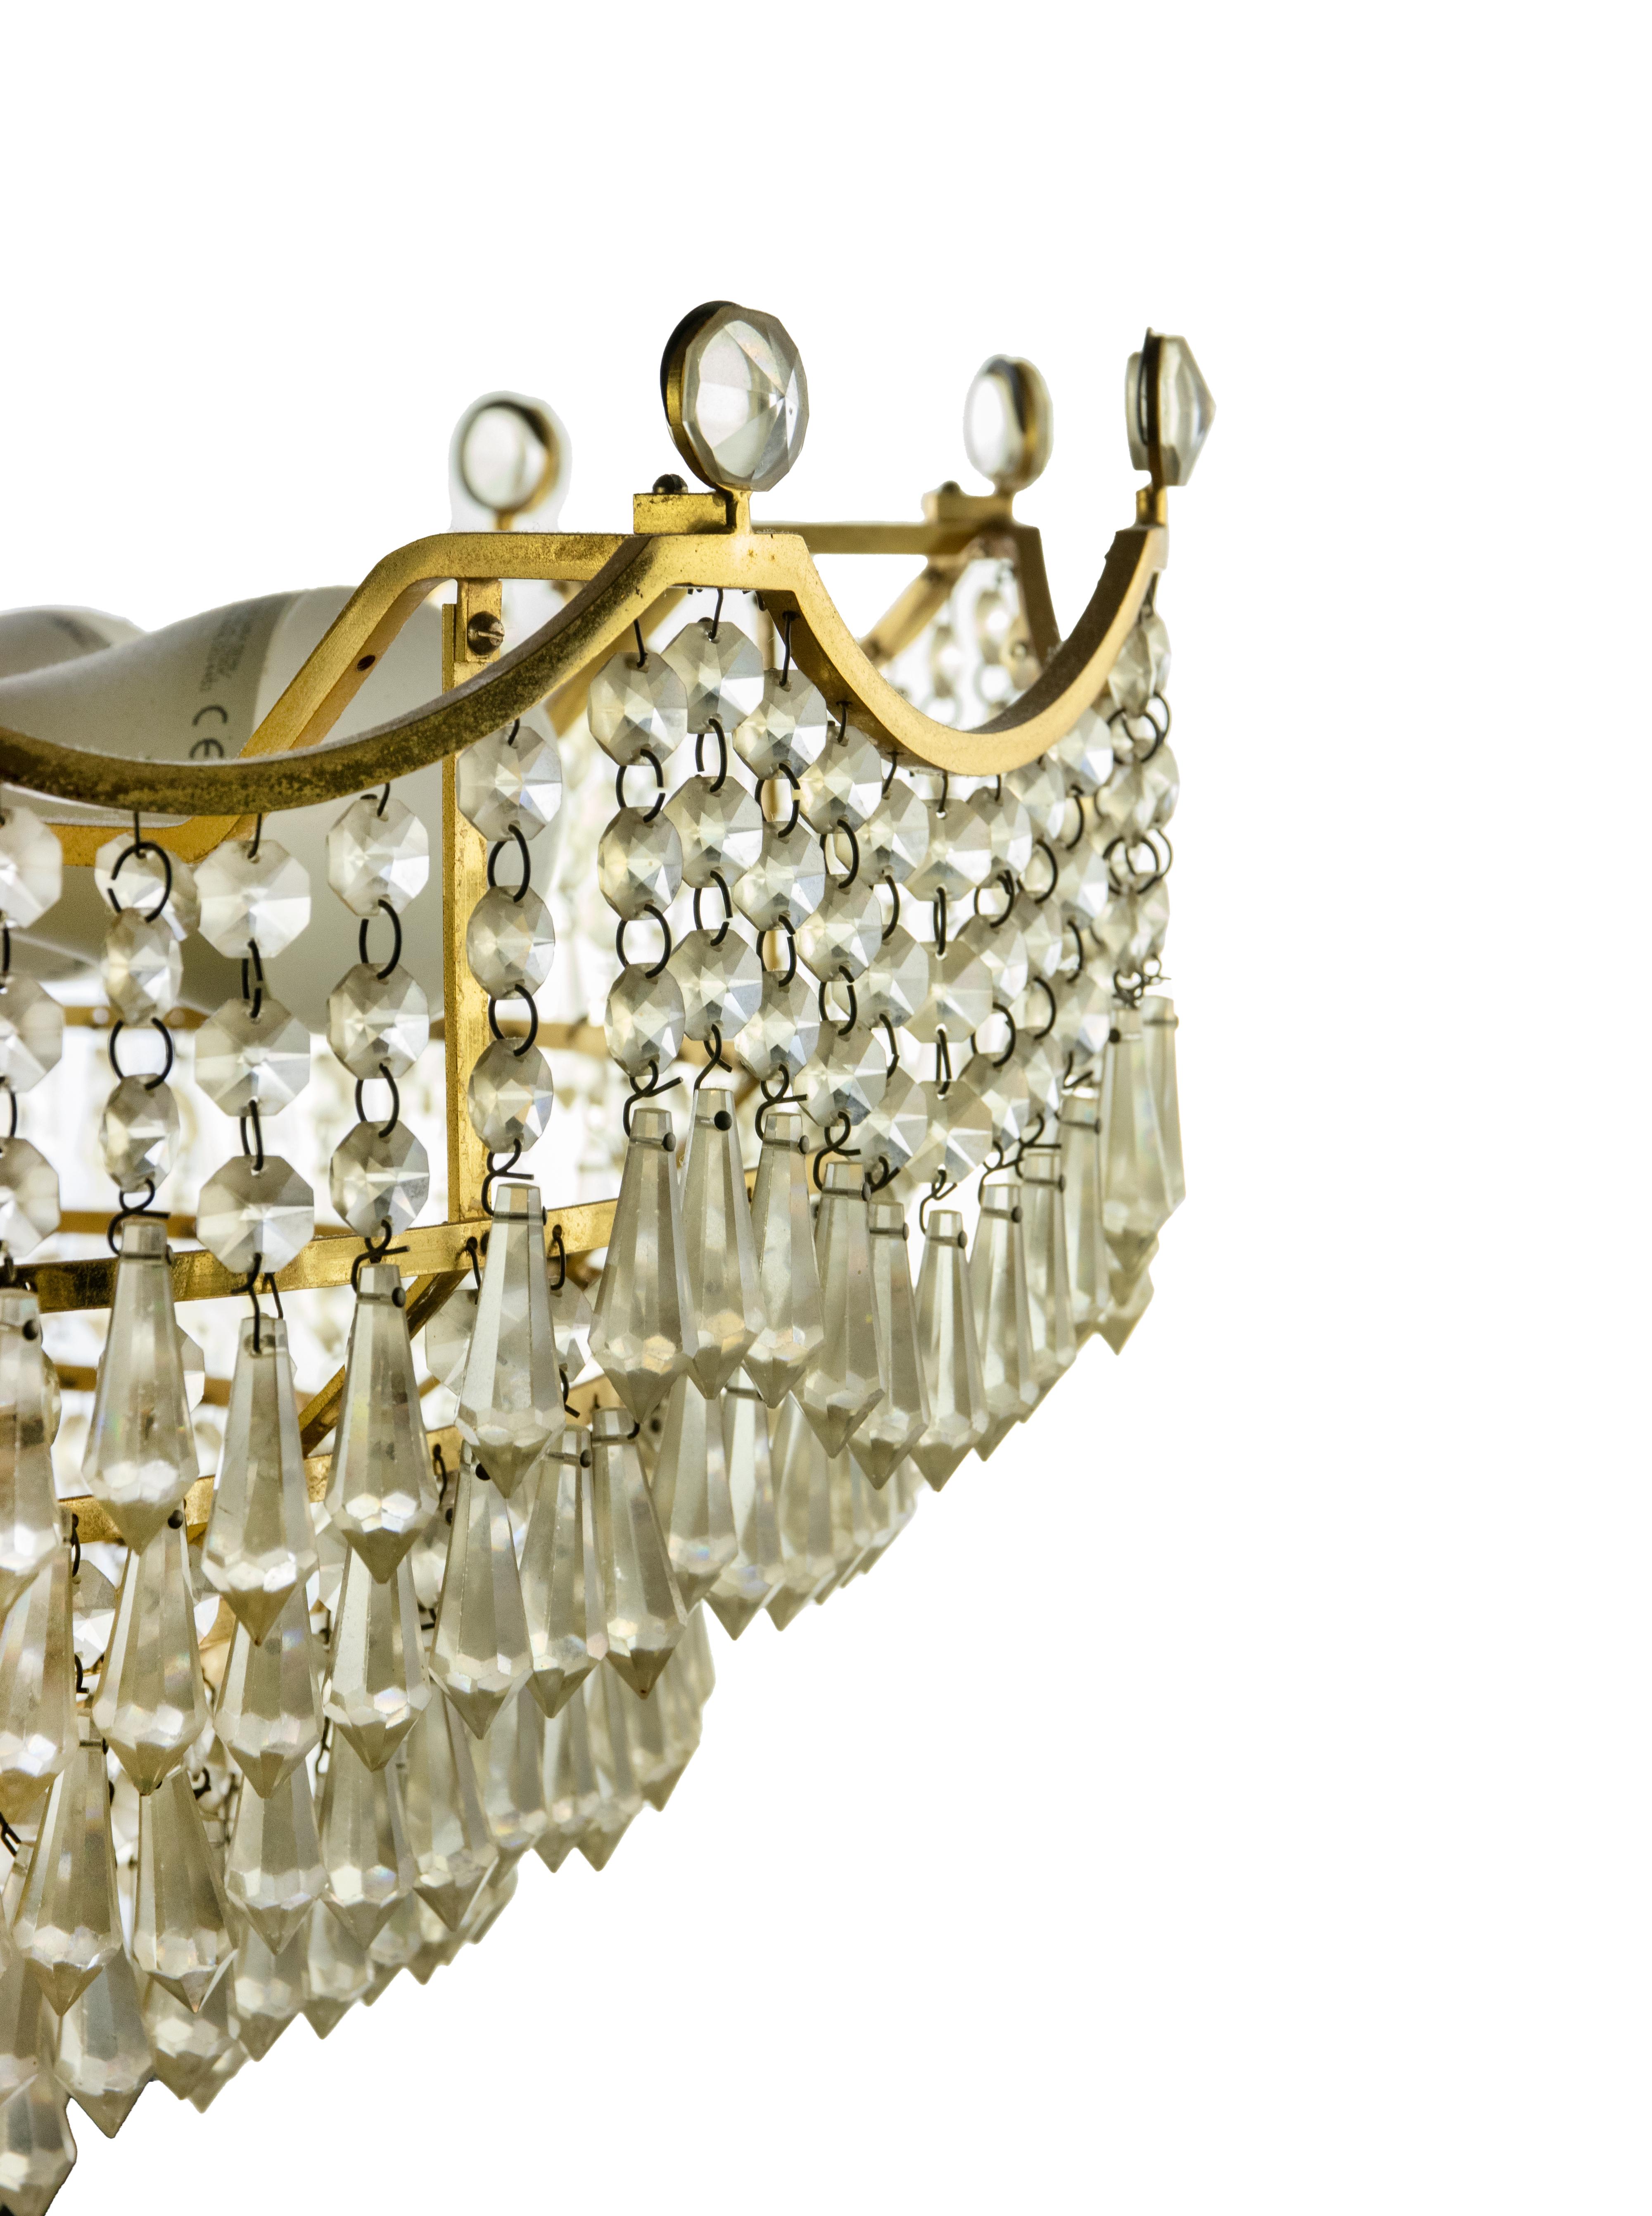 Crystal Drops Chandelier, Italy 1970s.

Gilded Brass, 6 lights.

Very good condition. 